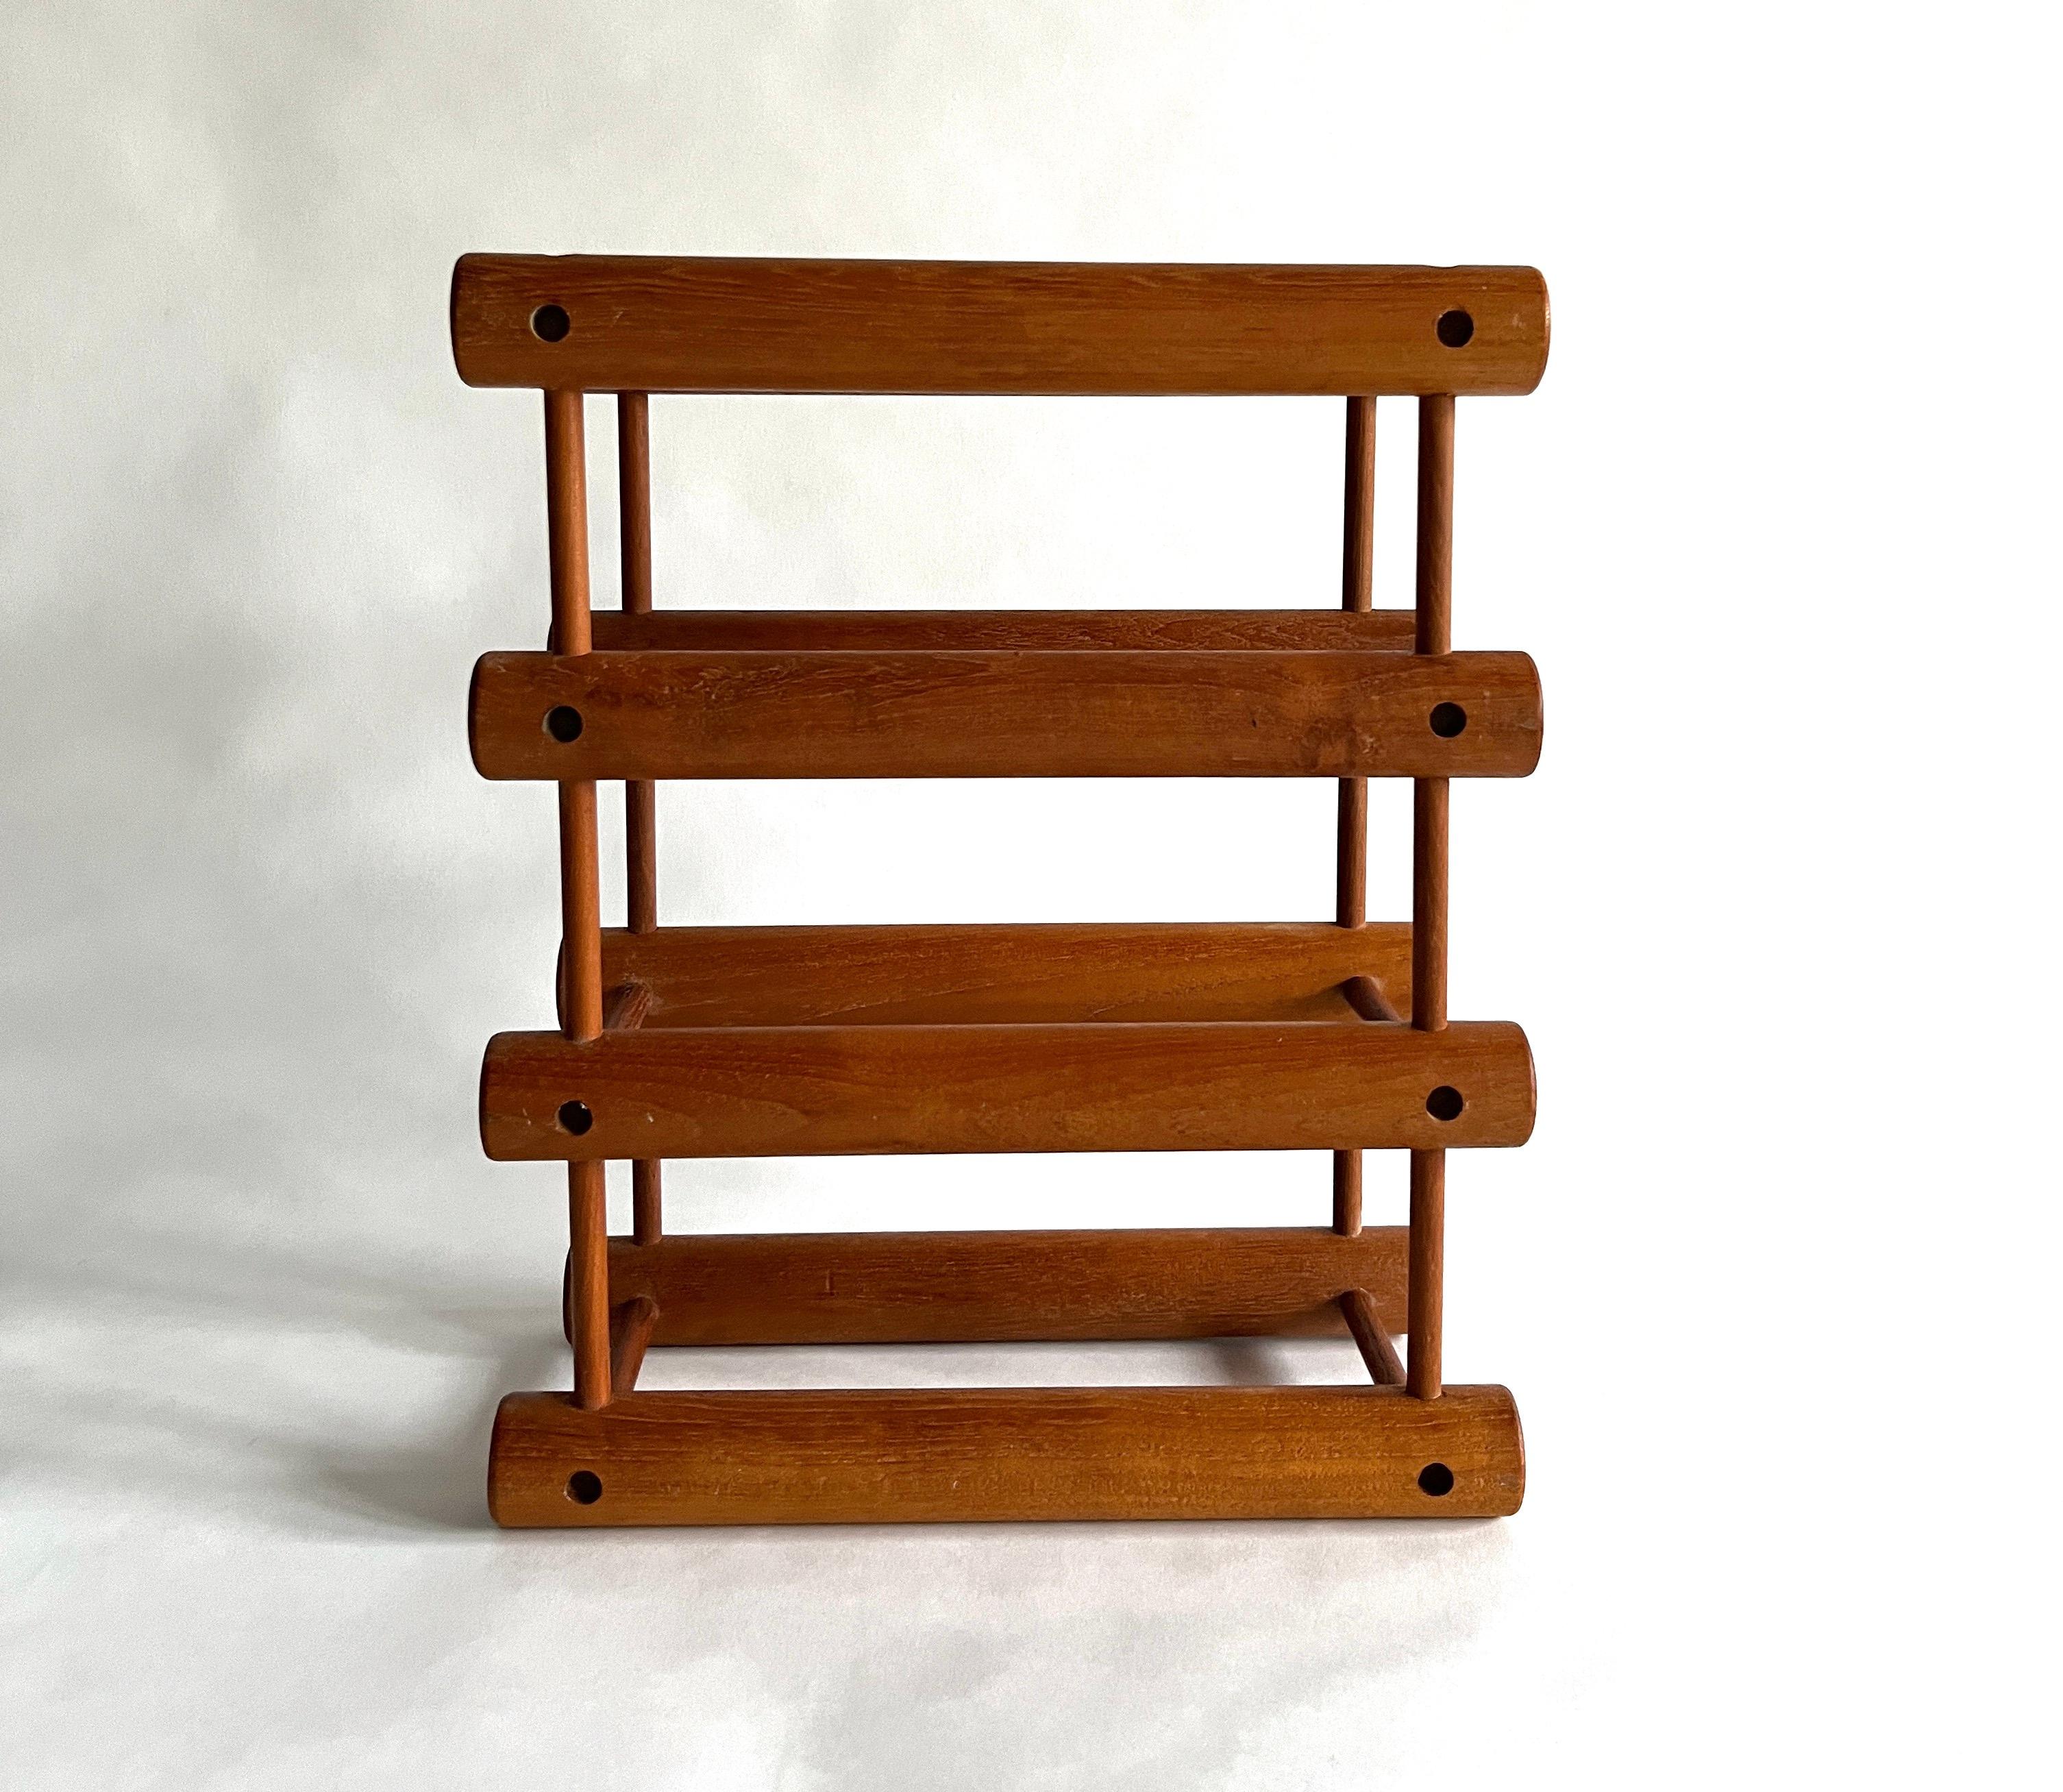 Original vintage Danish modern teak modular wine rack designed by Richard Nissen and made in Denmark by Langaa. Holds three wine bottles (or 6, depending how you orient it). Ingenious design consisting of solid teak pegs and dowels which can be